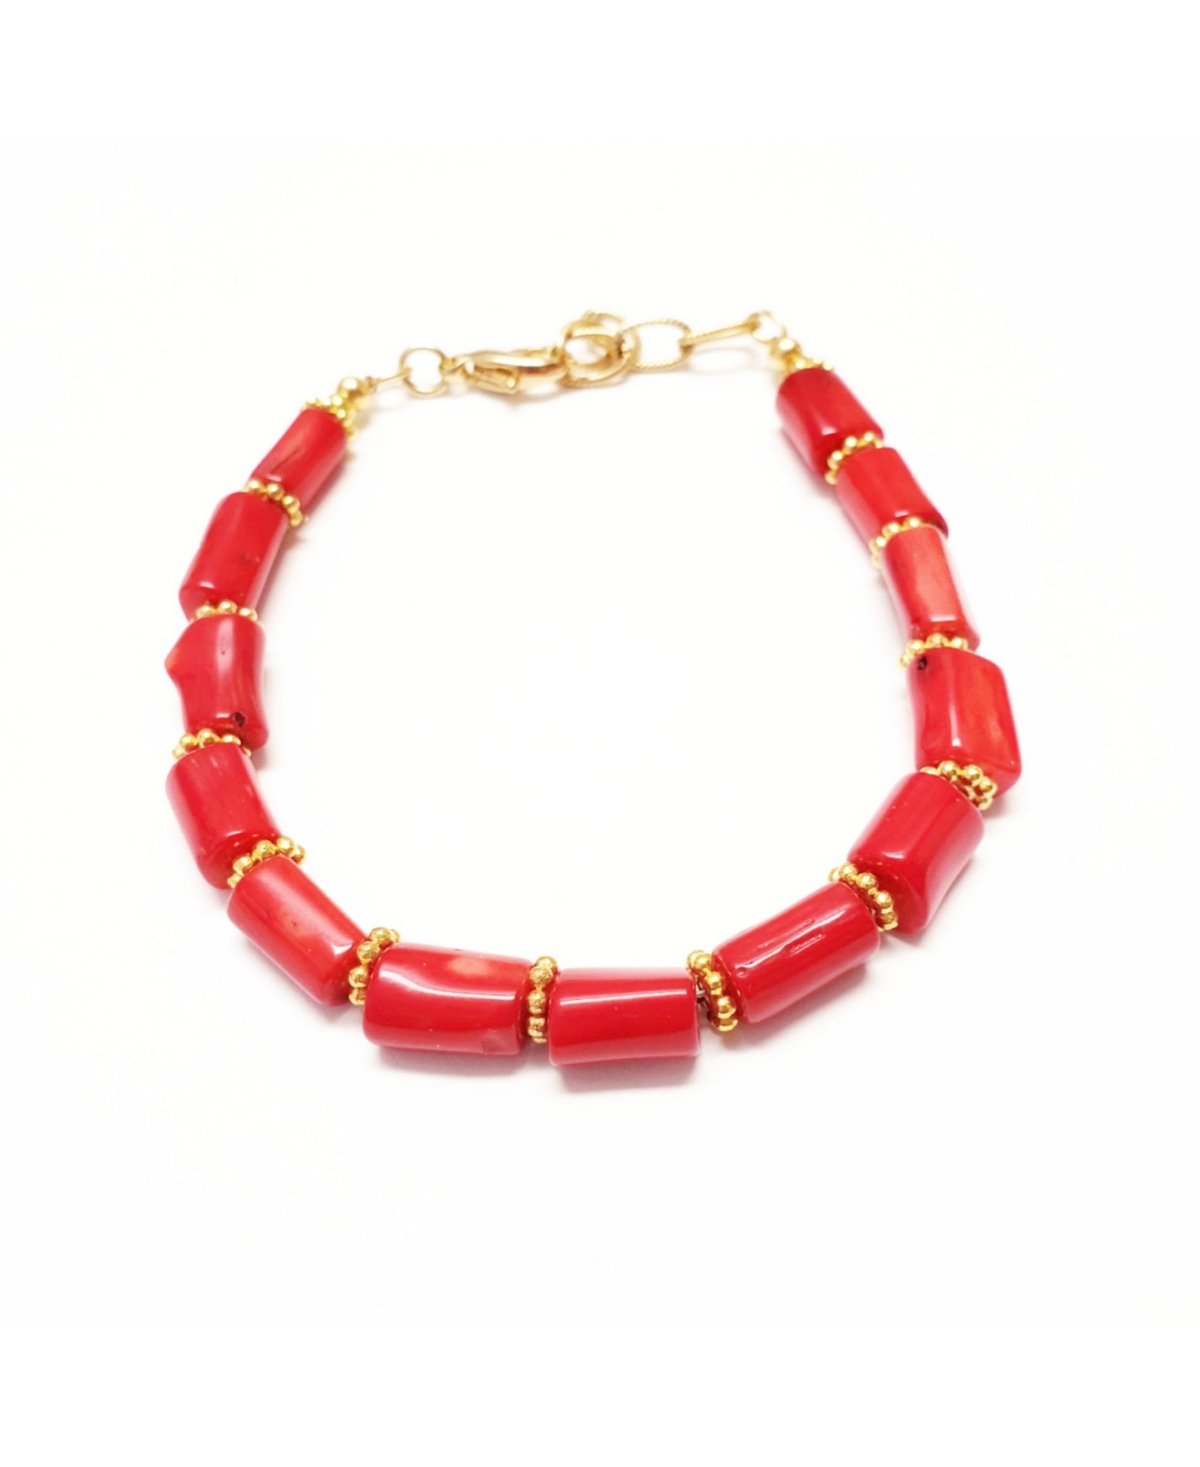 Women's Rouge Bracelet with Red Beads - Gold-tone